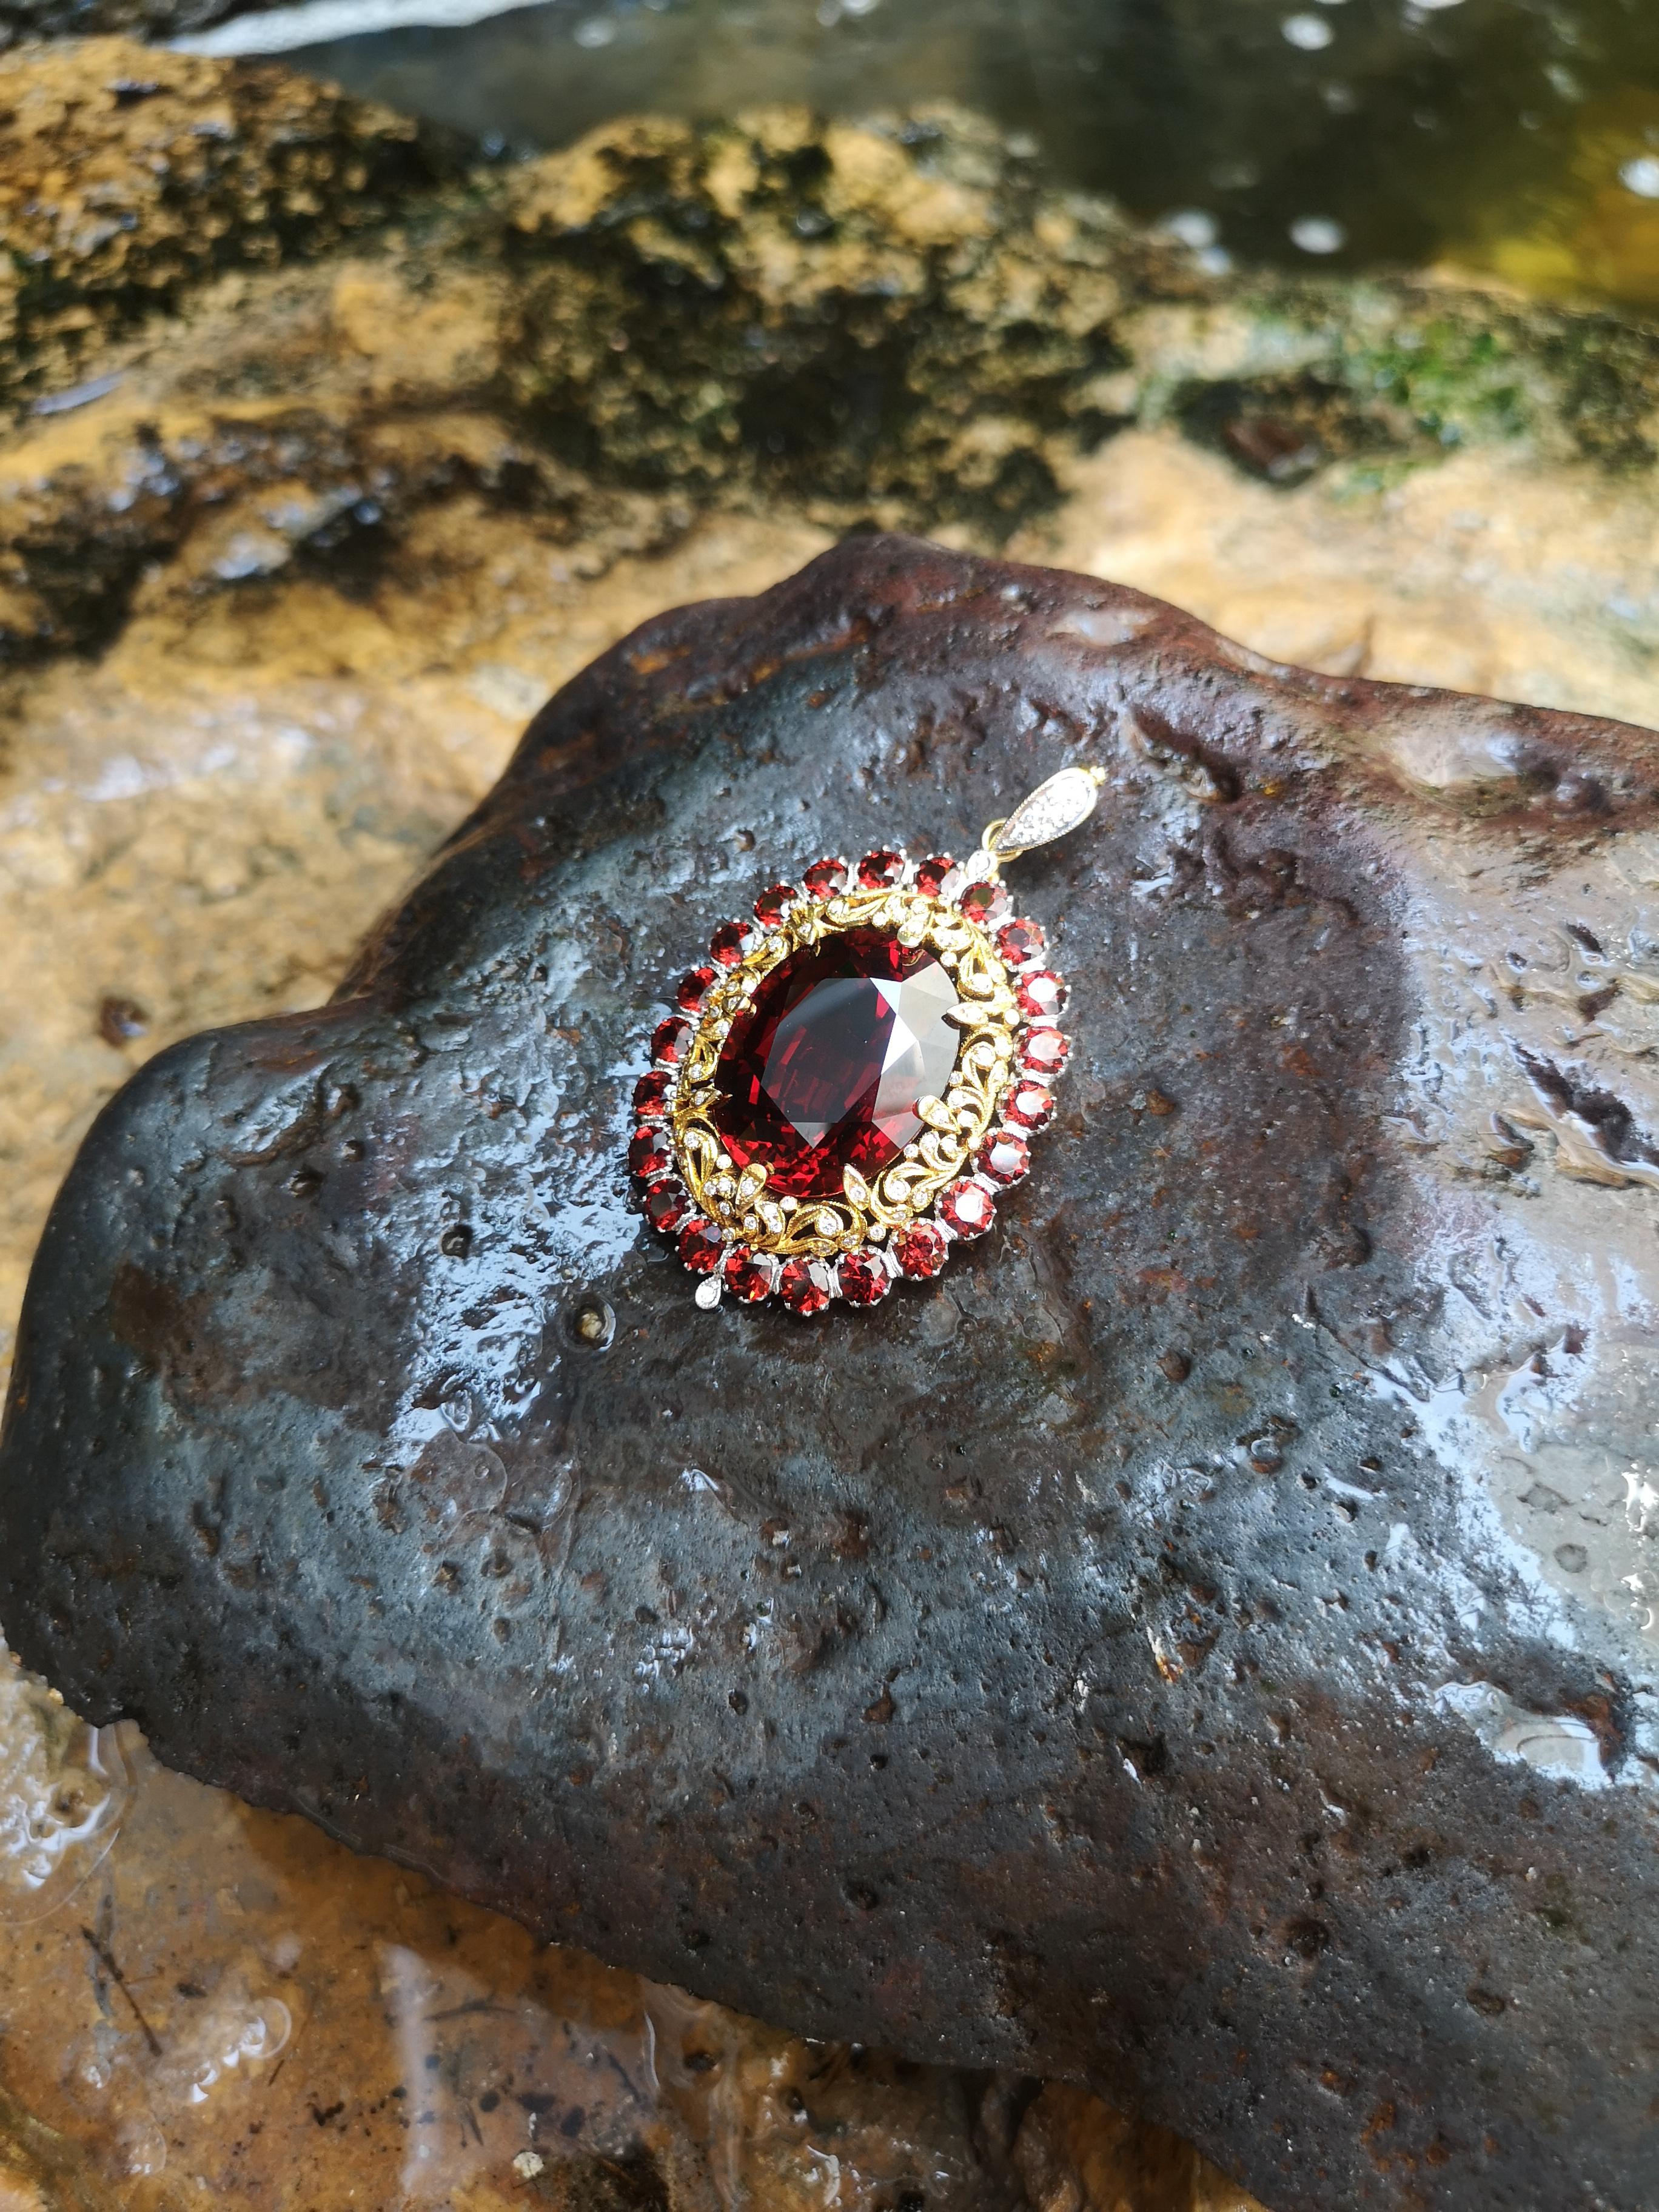 Spessartite Garnet 52.82 carats with Spessartite Garnet 9.81 carats and Diamond 0.63 carat Brooch set in 18 Karat White Gold Settings
(chain not included)

Width: 3.9 cm
Length: 6.0 cm 

